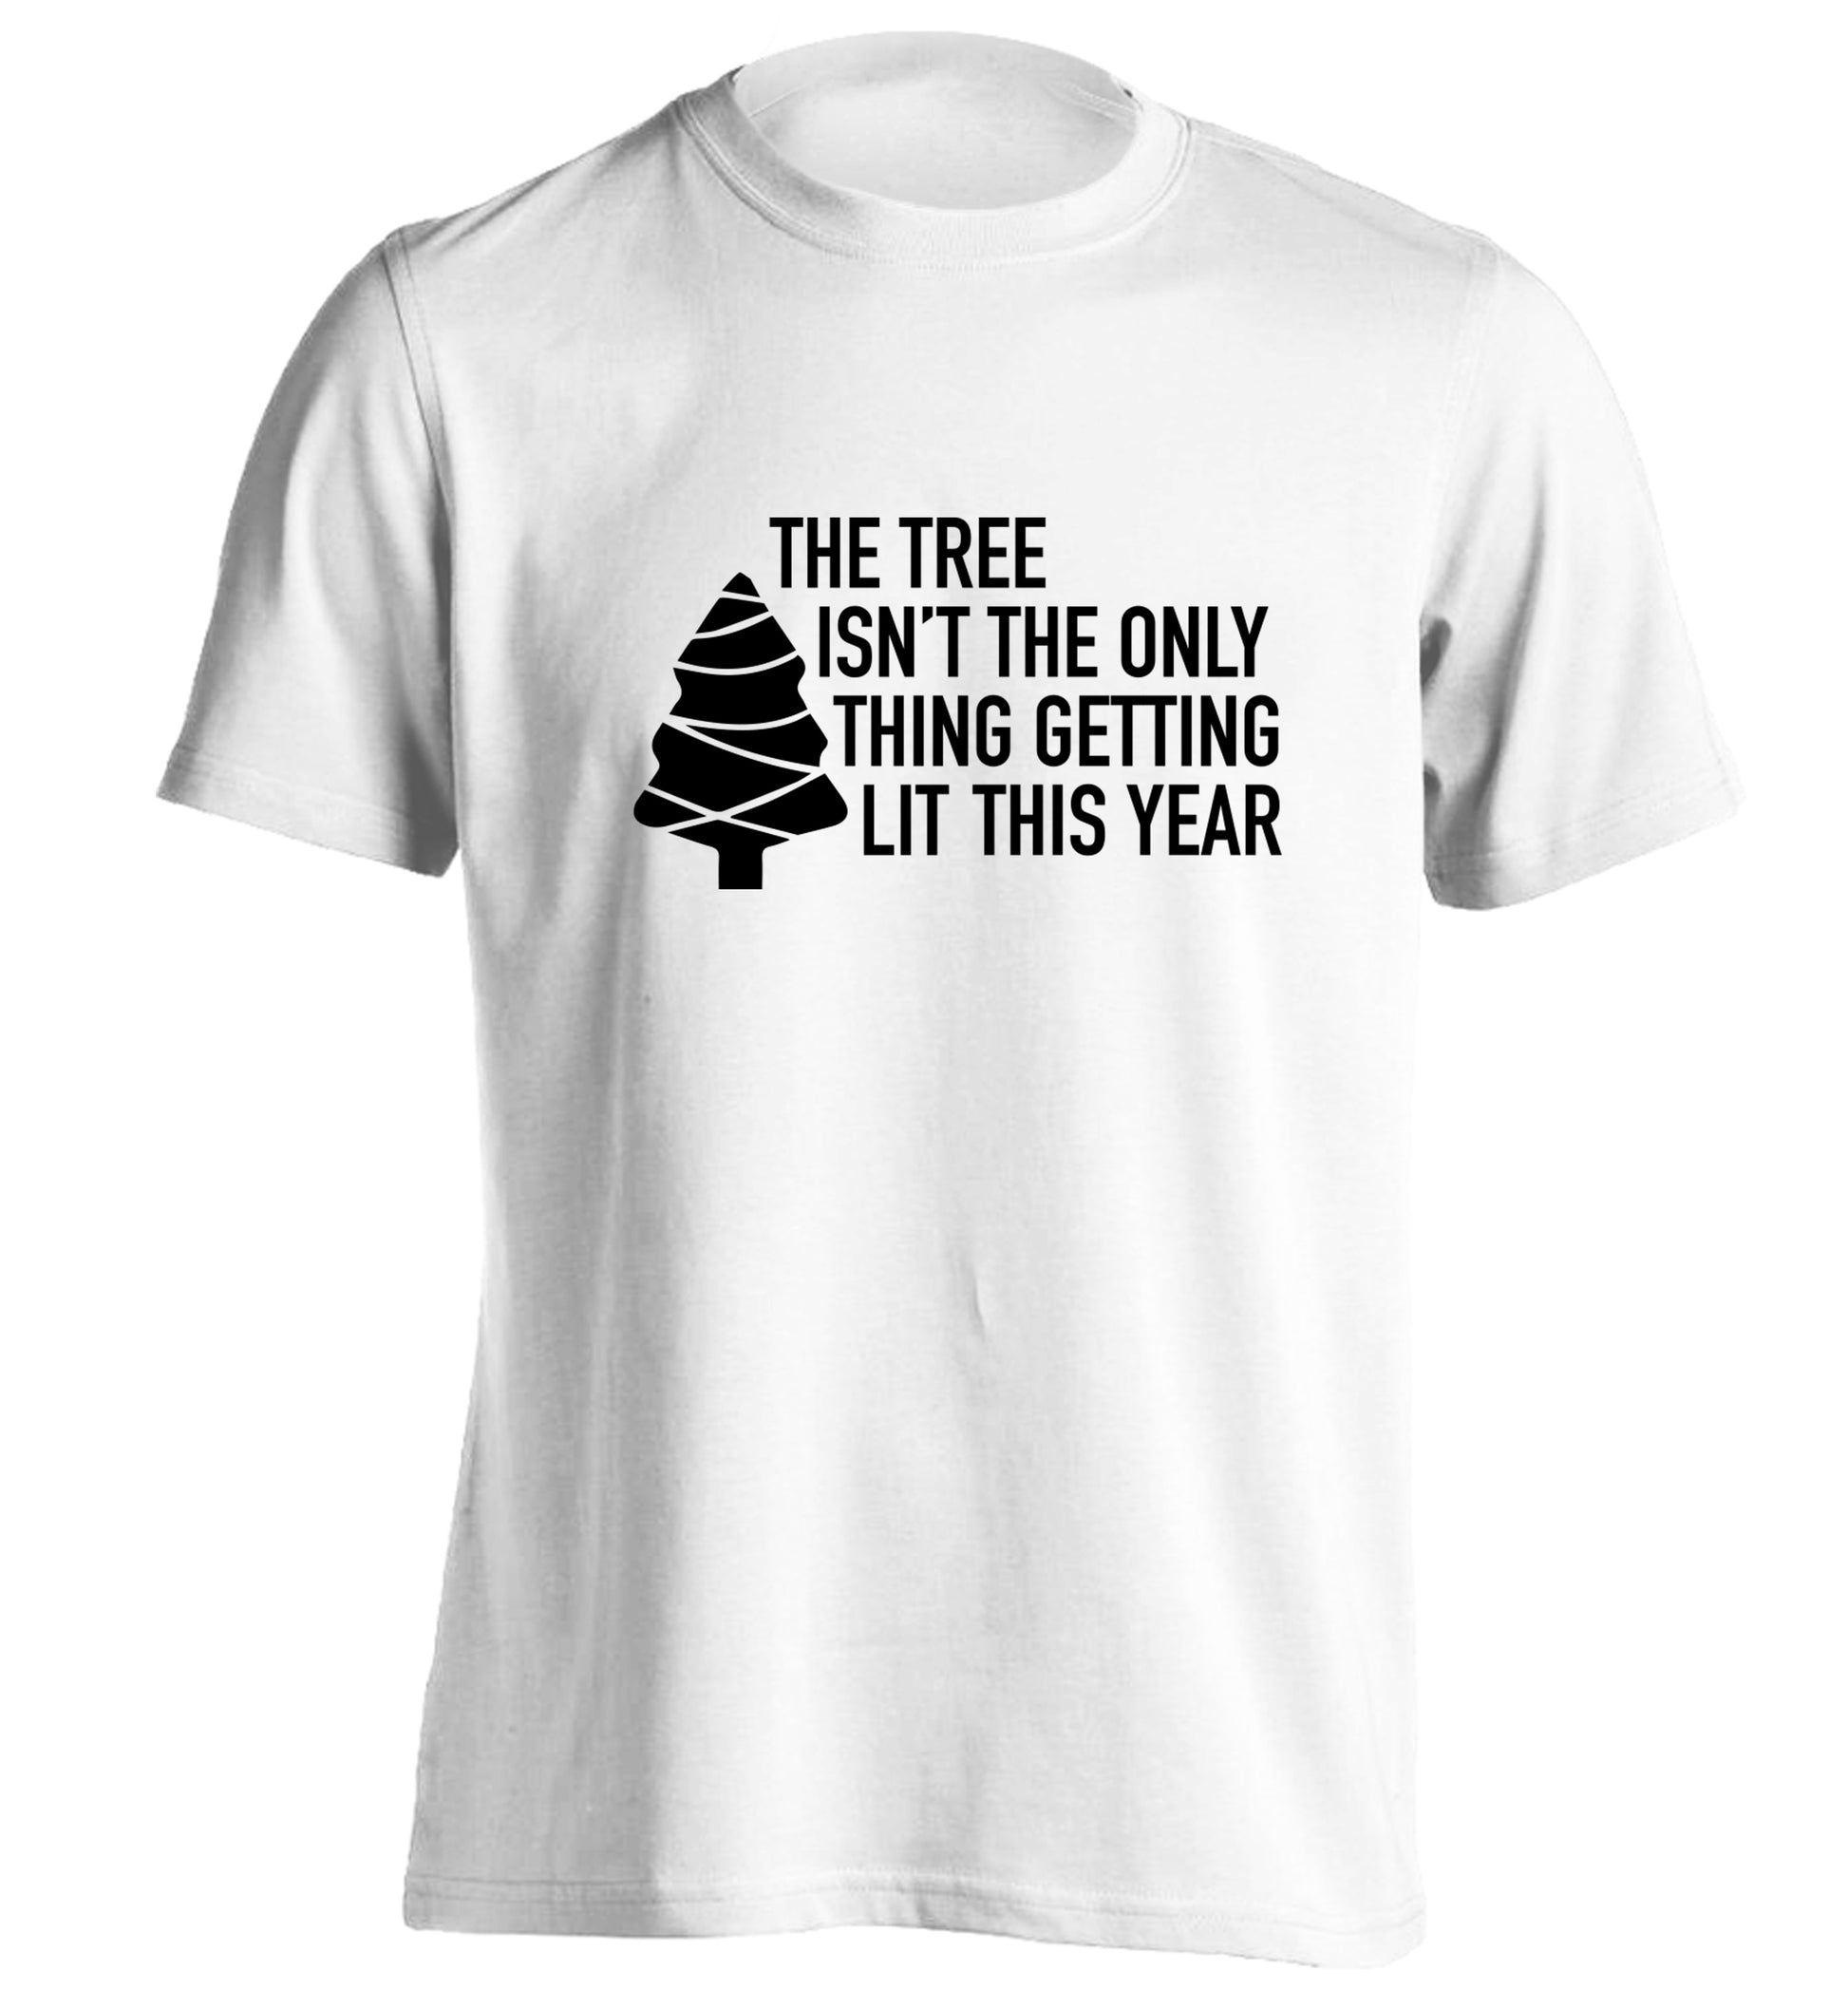 The tree isn't the only thing getting lit this year adults unisex white Tshirt 2XL